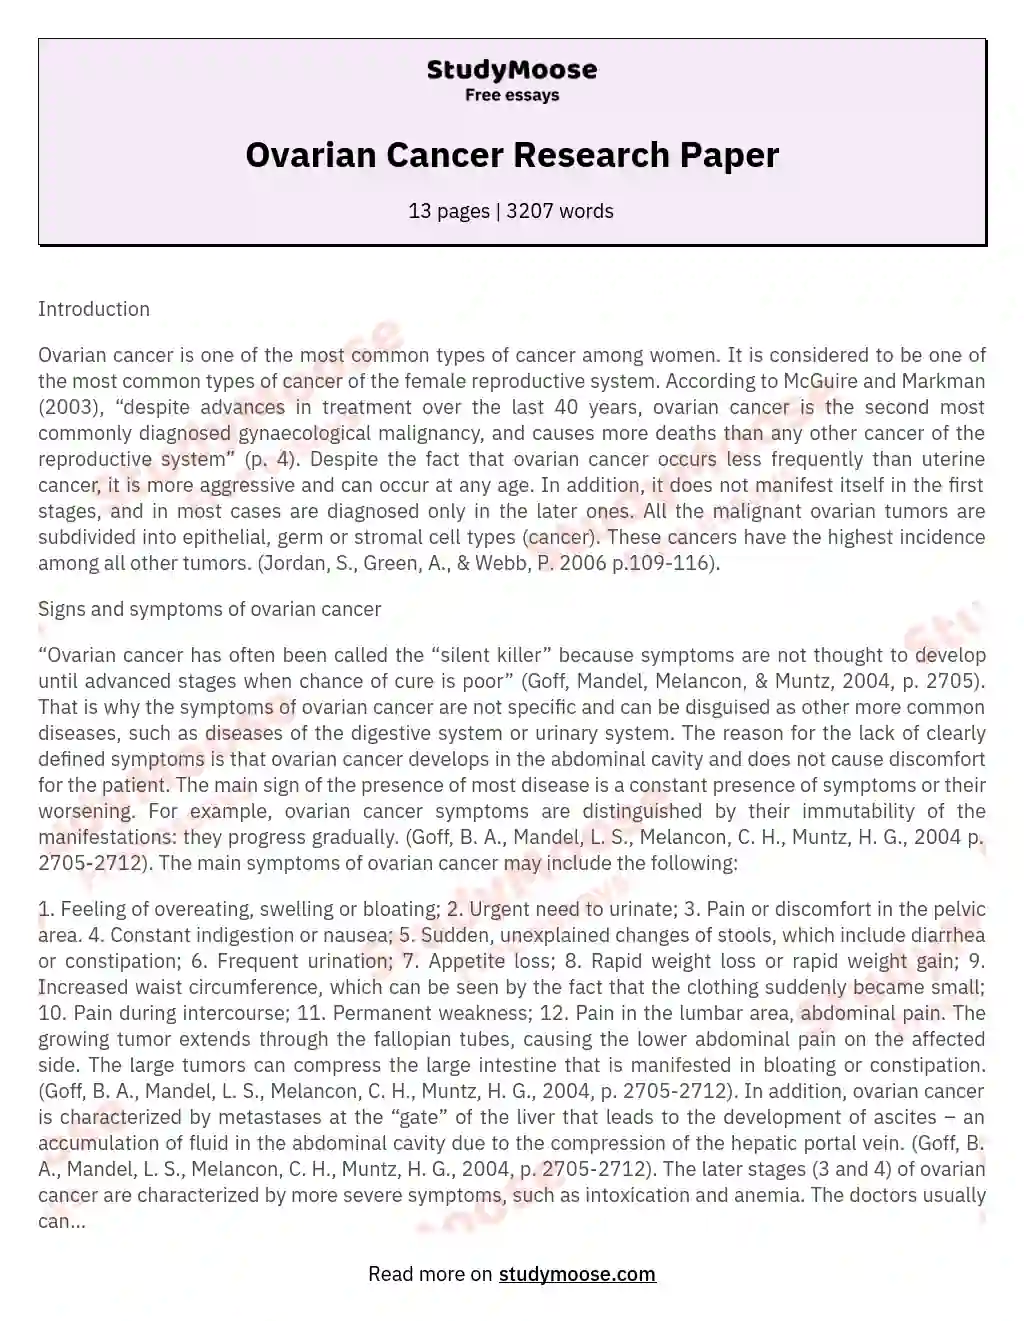 Ovarian Cancer Research Paper essay